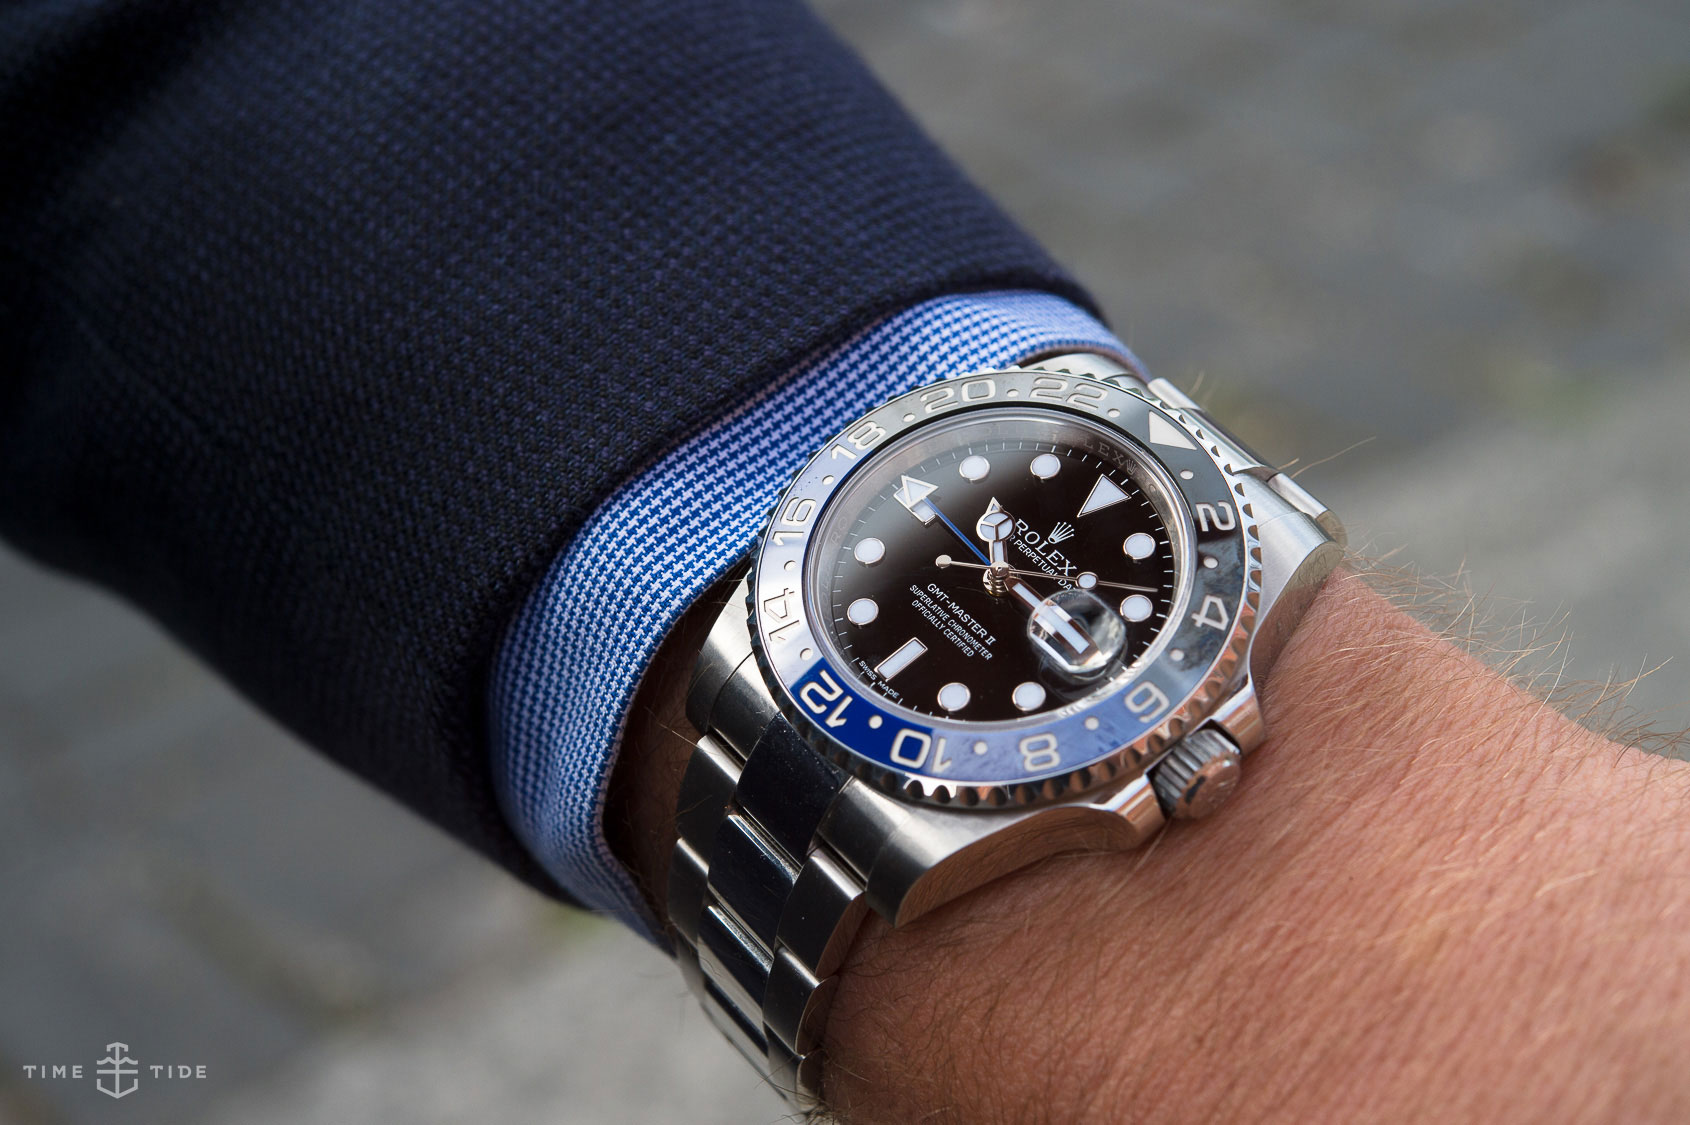 Rolex GMT Master II BLNR In-depth Review